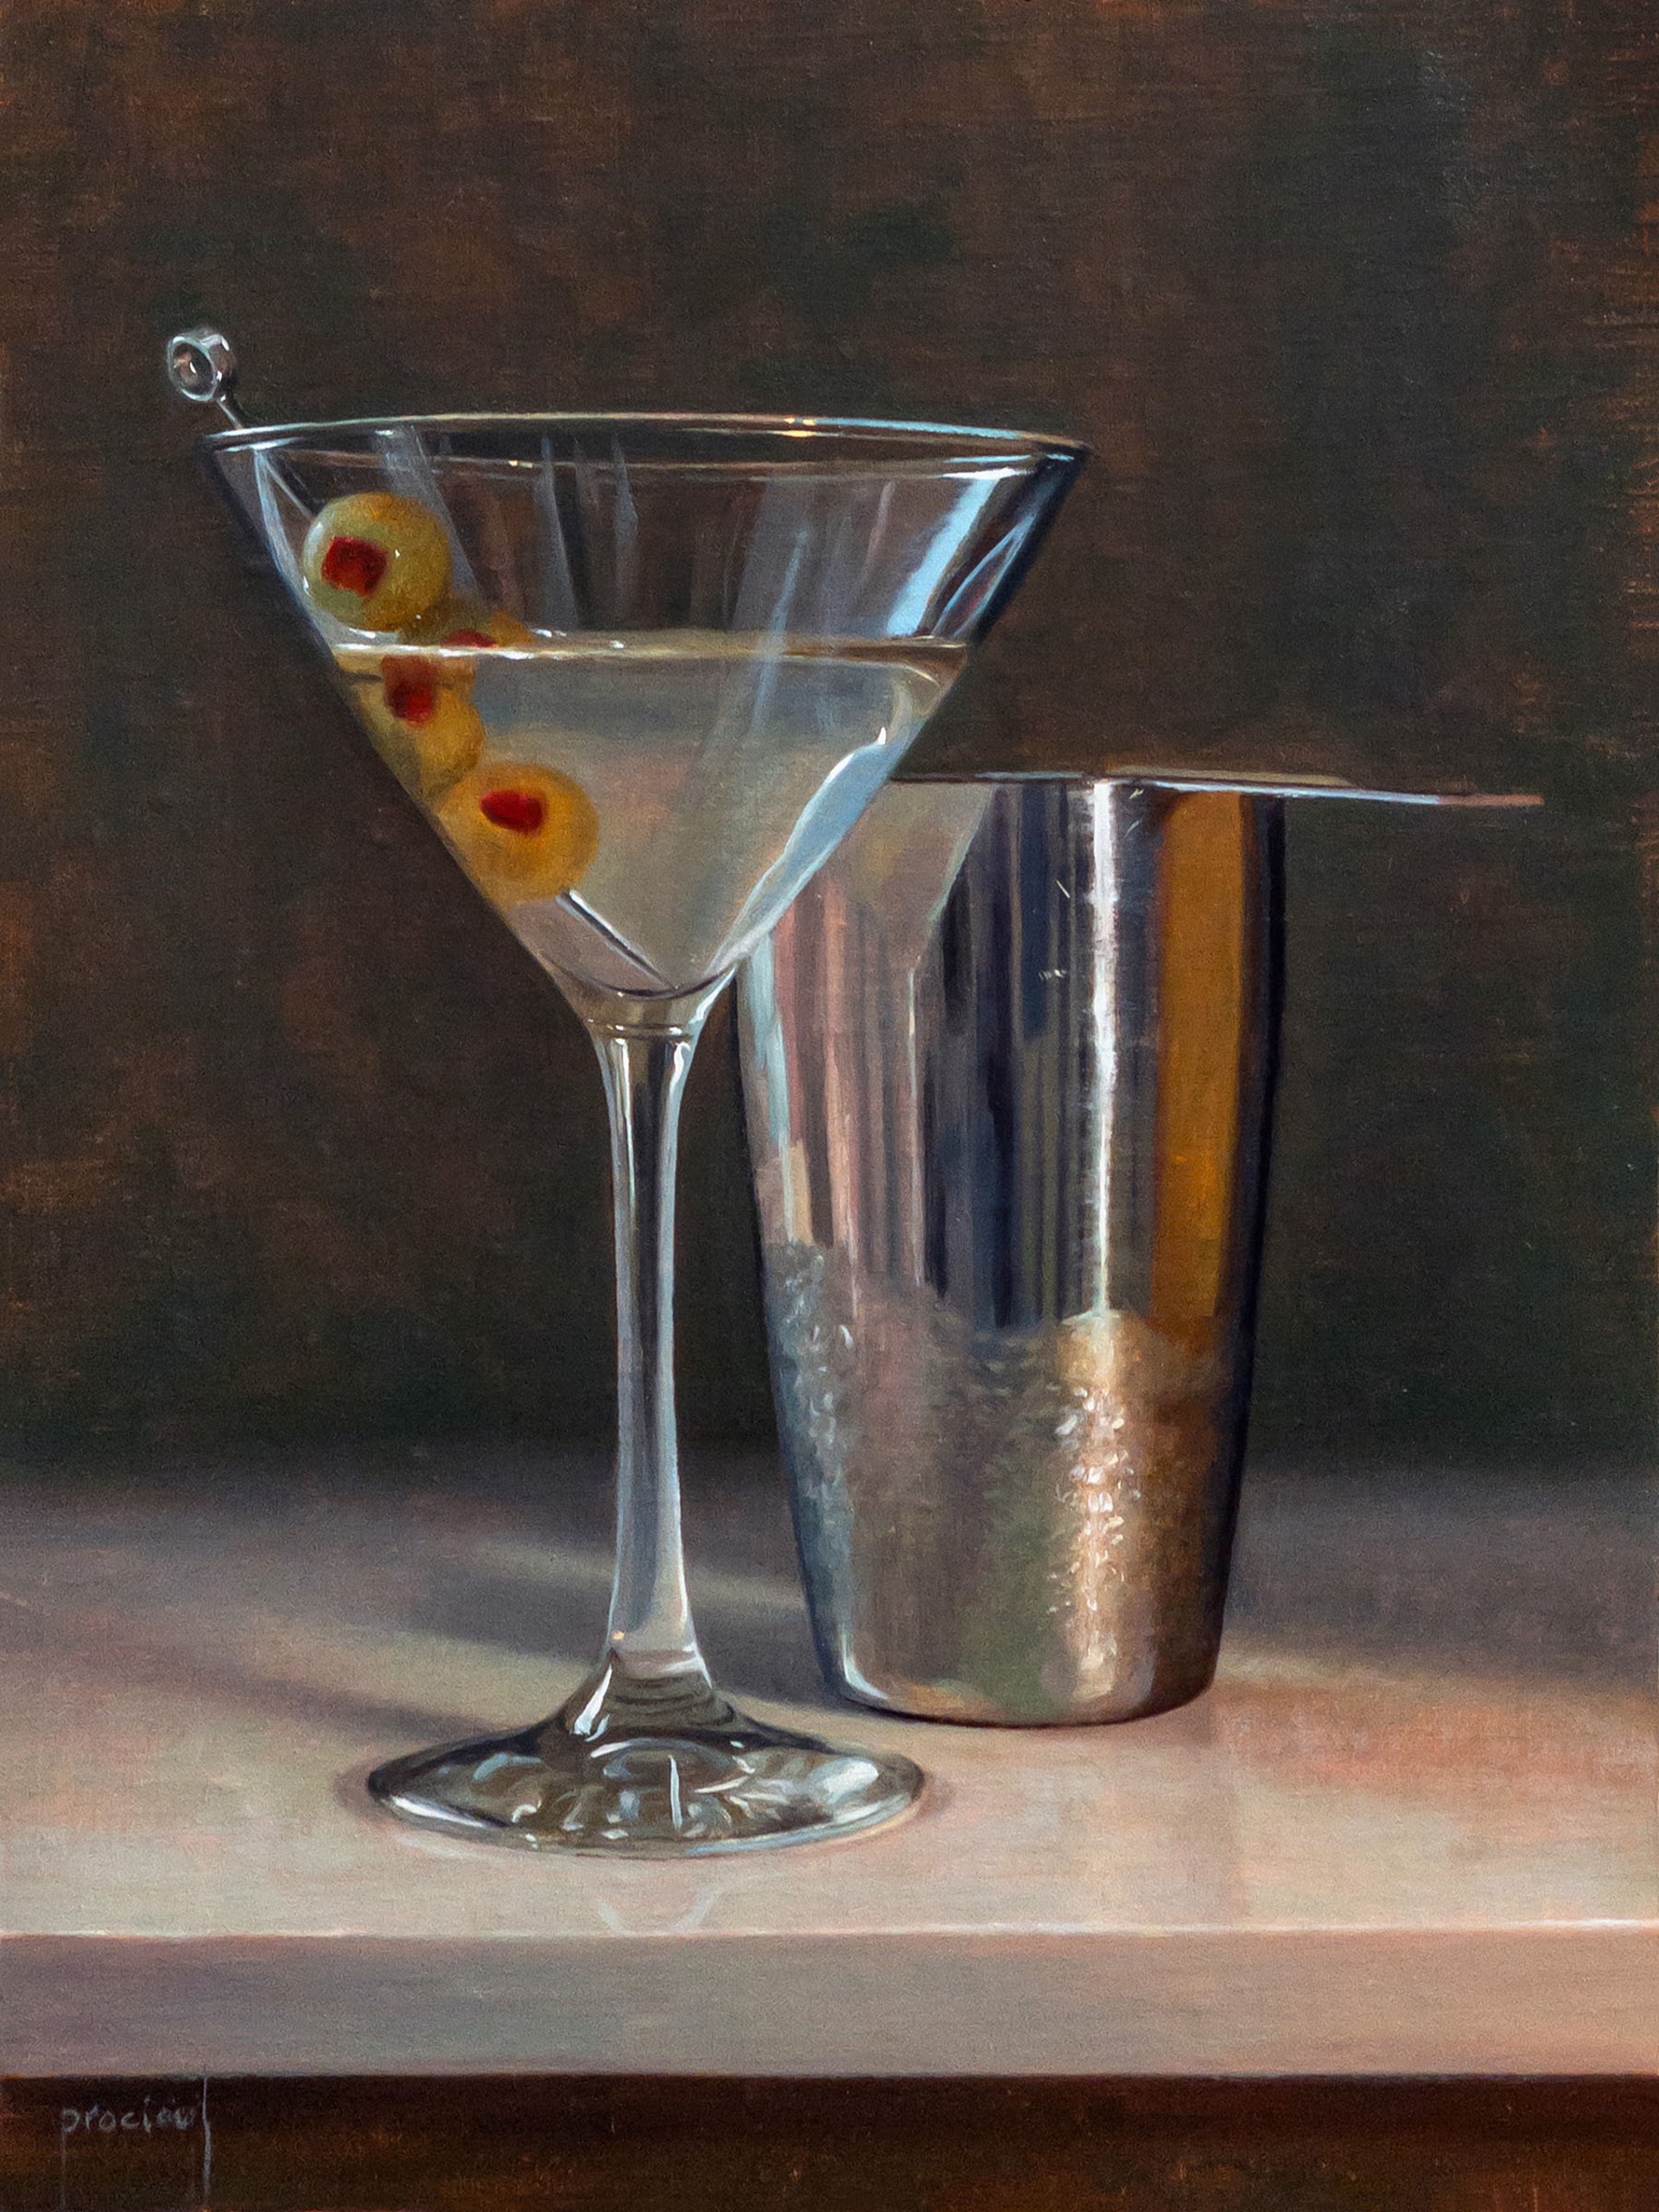 Martini and Shaker by Cindy Procious